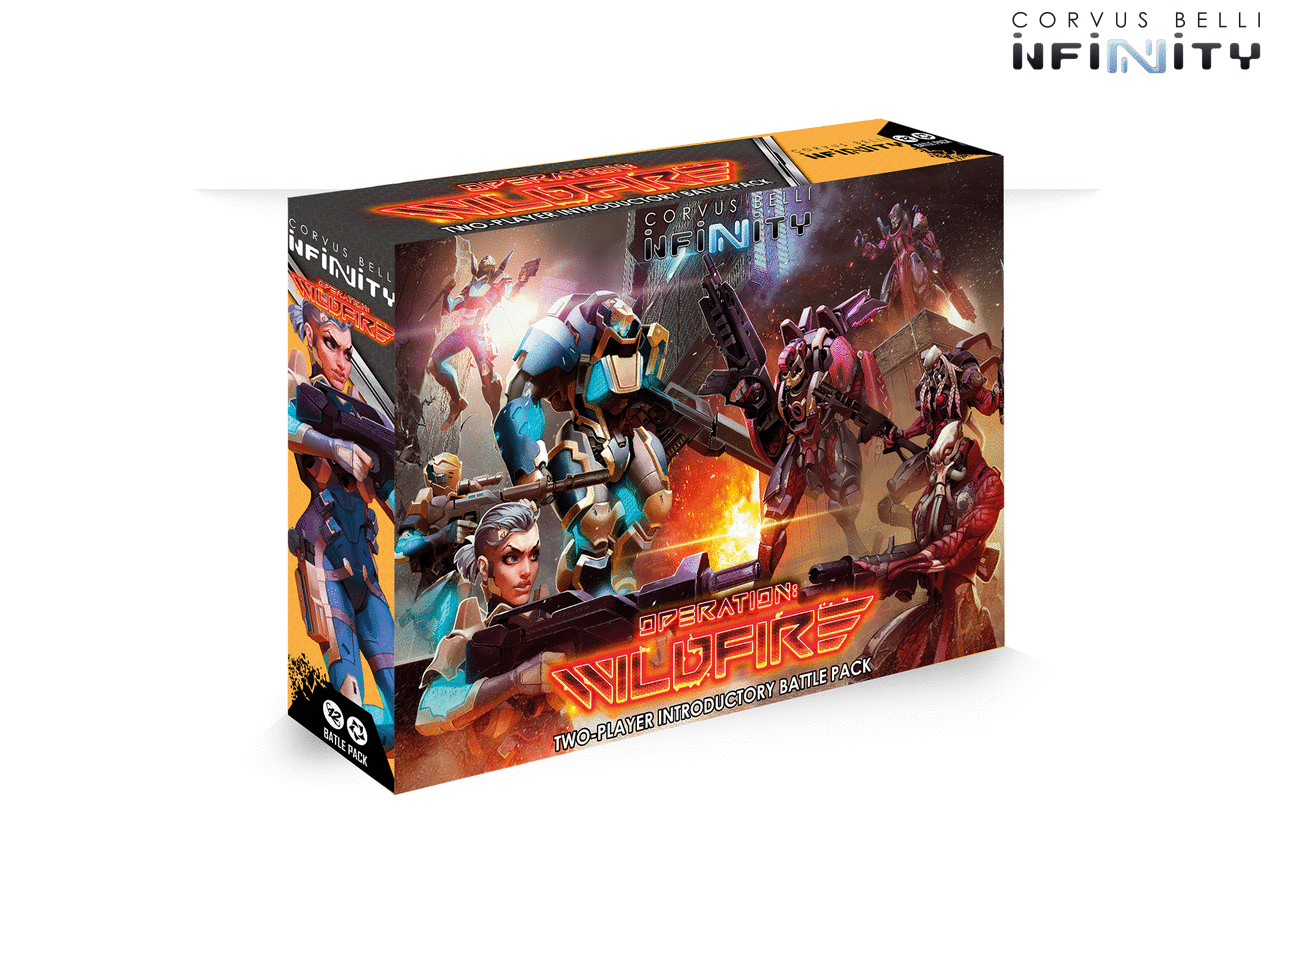 Infinity - Operation: Wildfire (2-Player Introductory Pack)